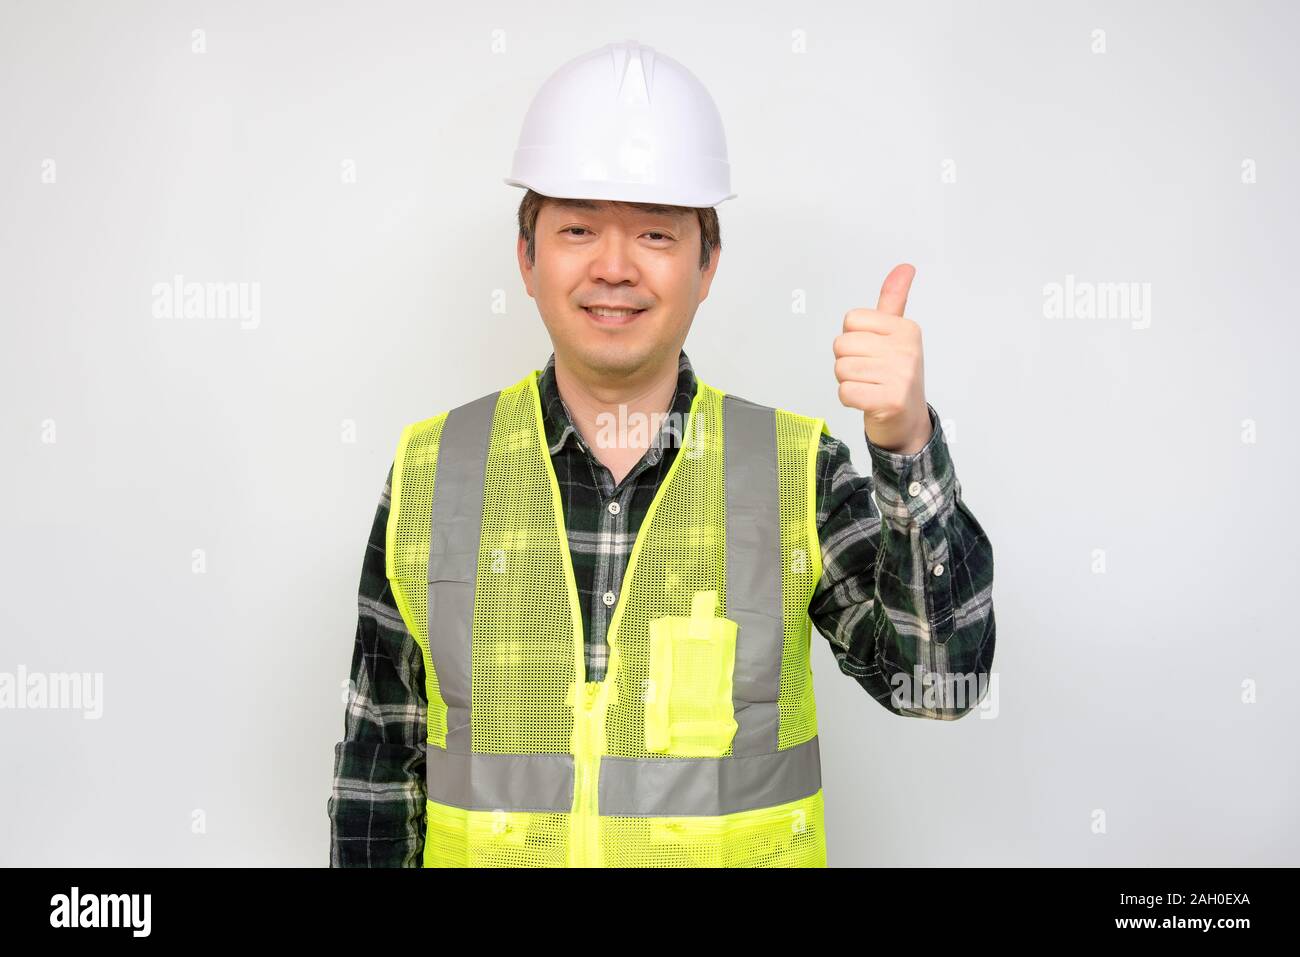 Asian middle-aged man in a Light green work vest and white safety hat. Stock Photo